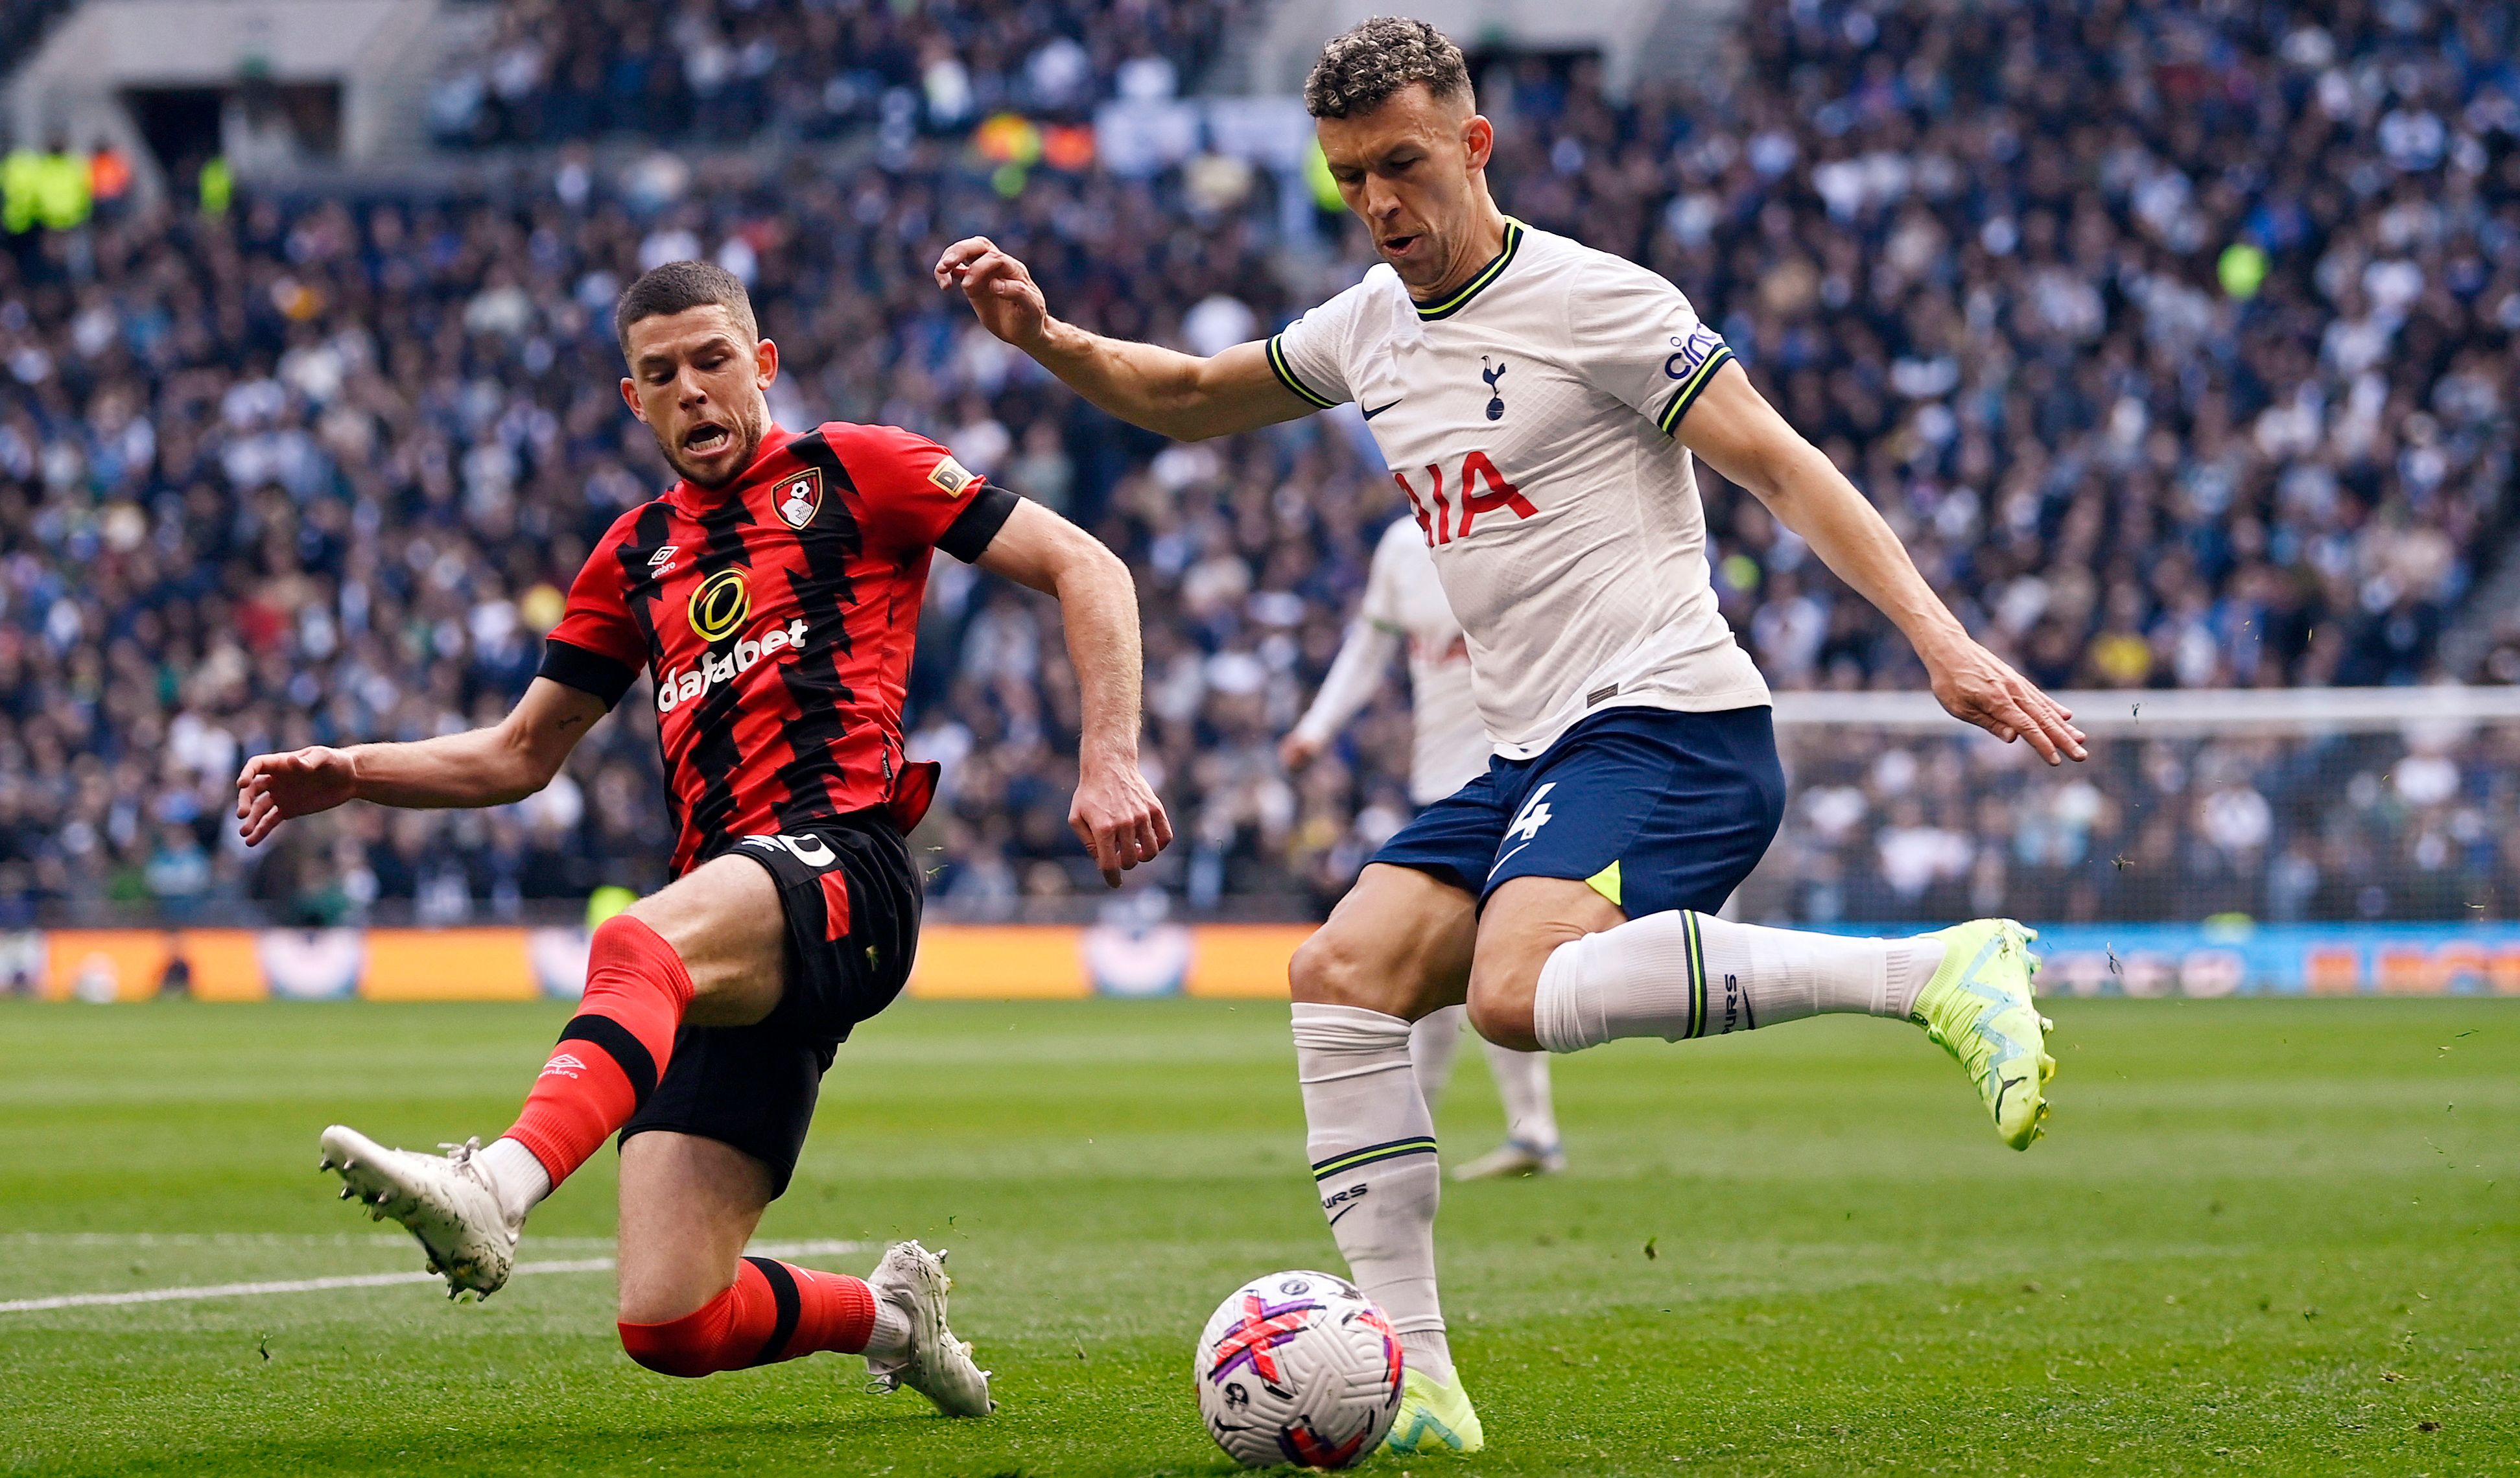 AFC Bournemouth's Ryan Christie in action with Tottenham Hotspur's Ivan Perisic (1)